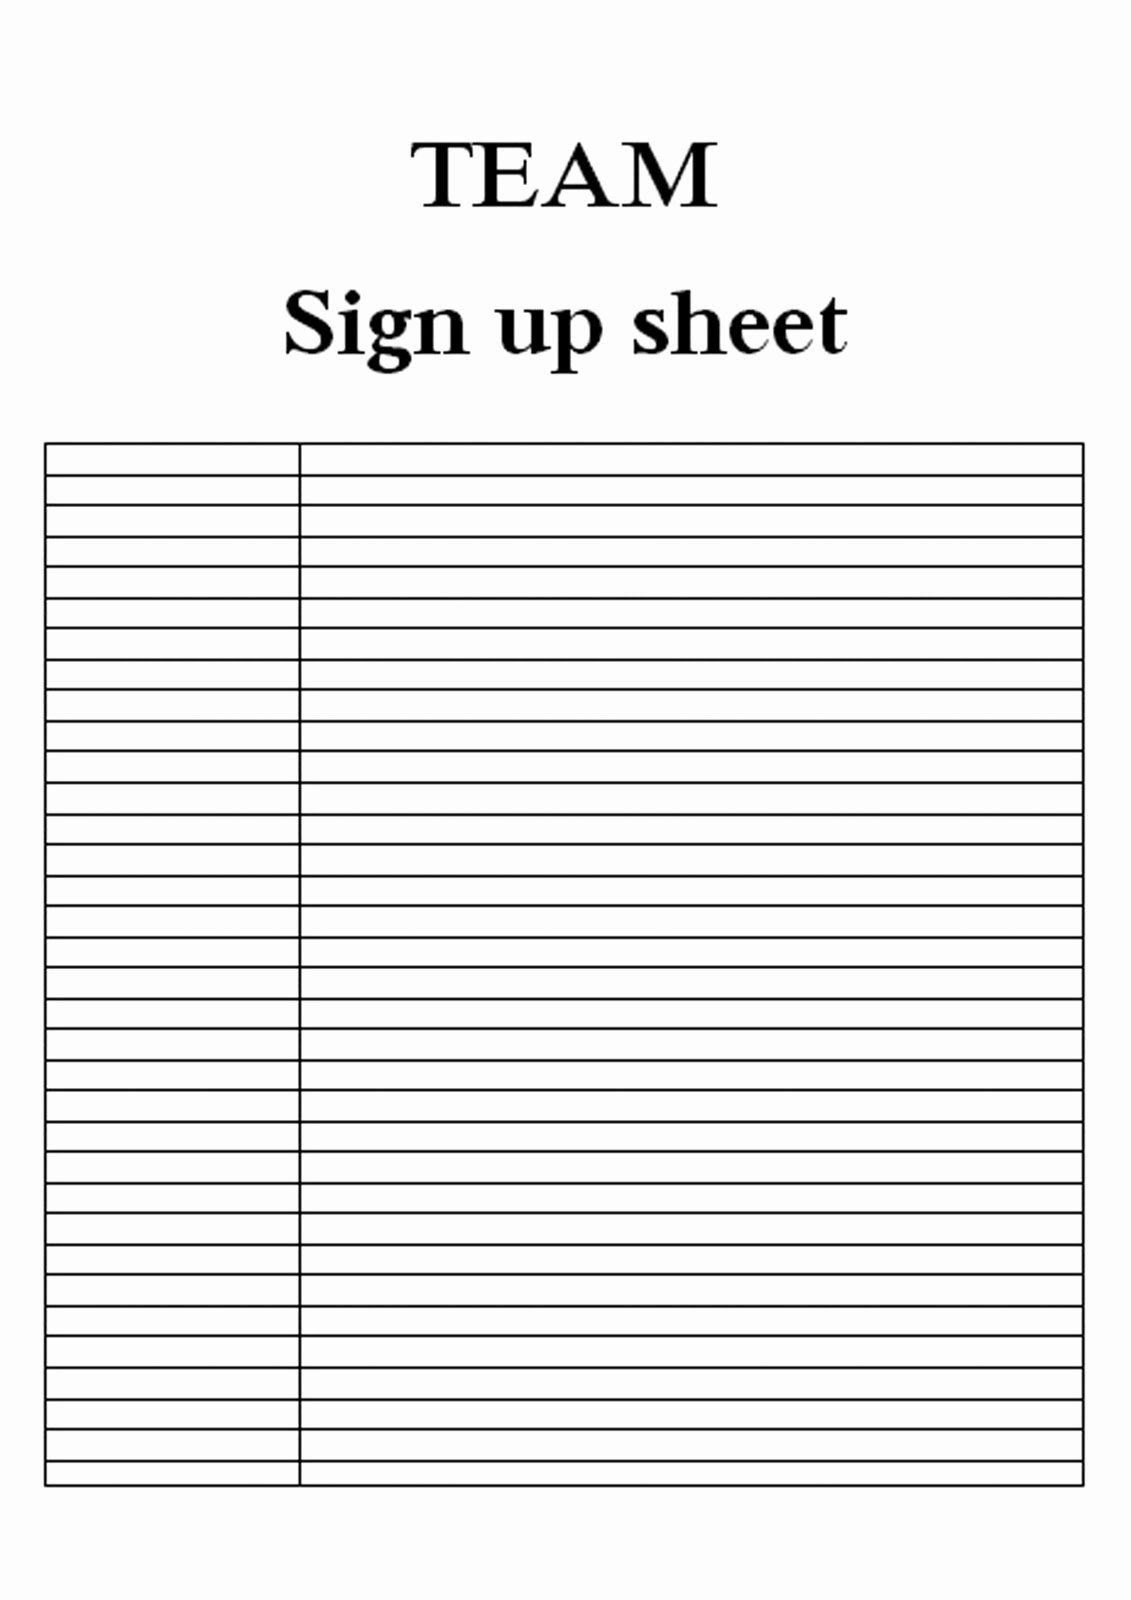 Sign Up Sheet Template Pdf Awesome Sign Up Sheet Word Templates Word Excel Pdf formats